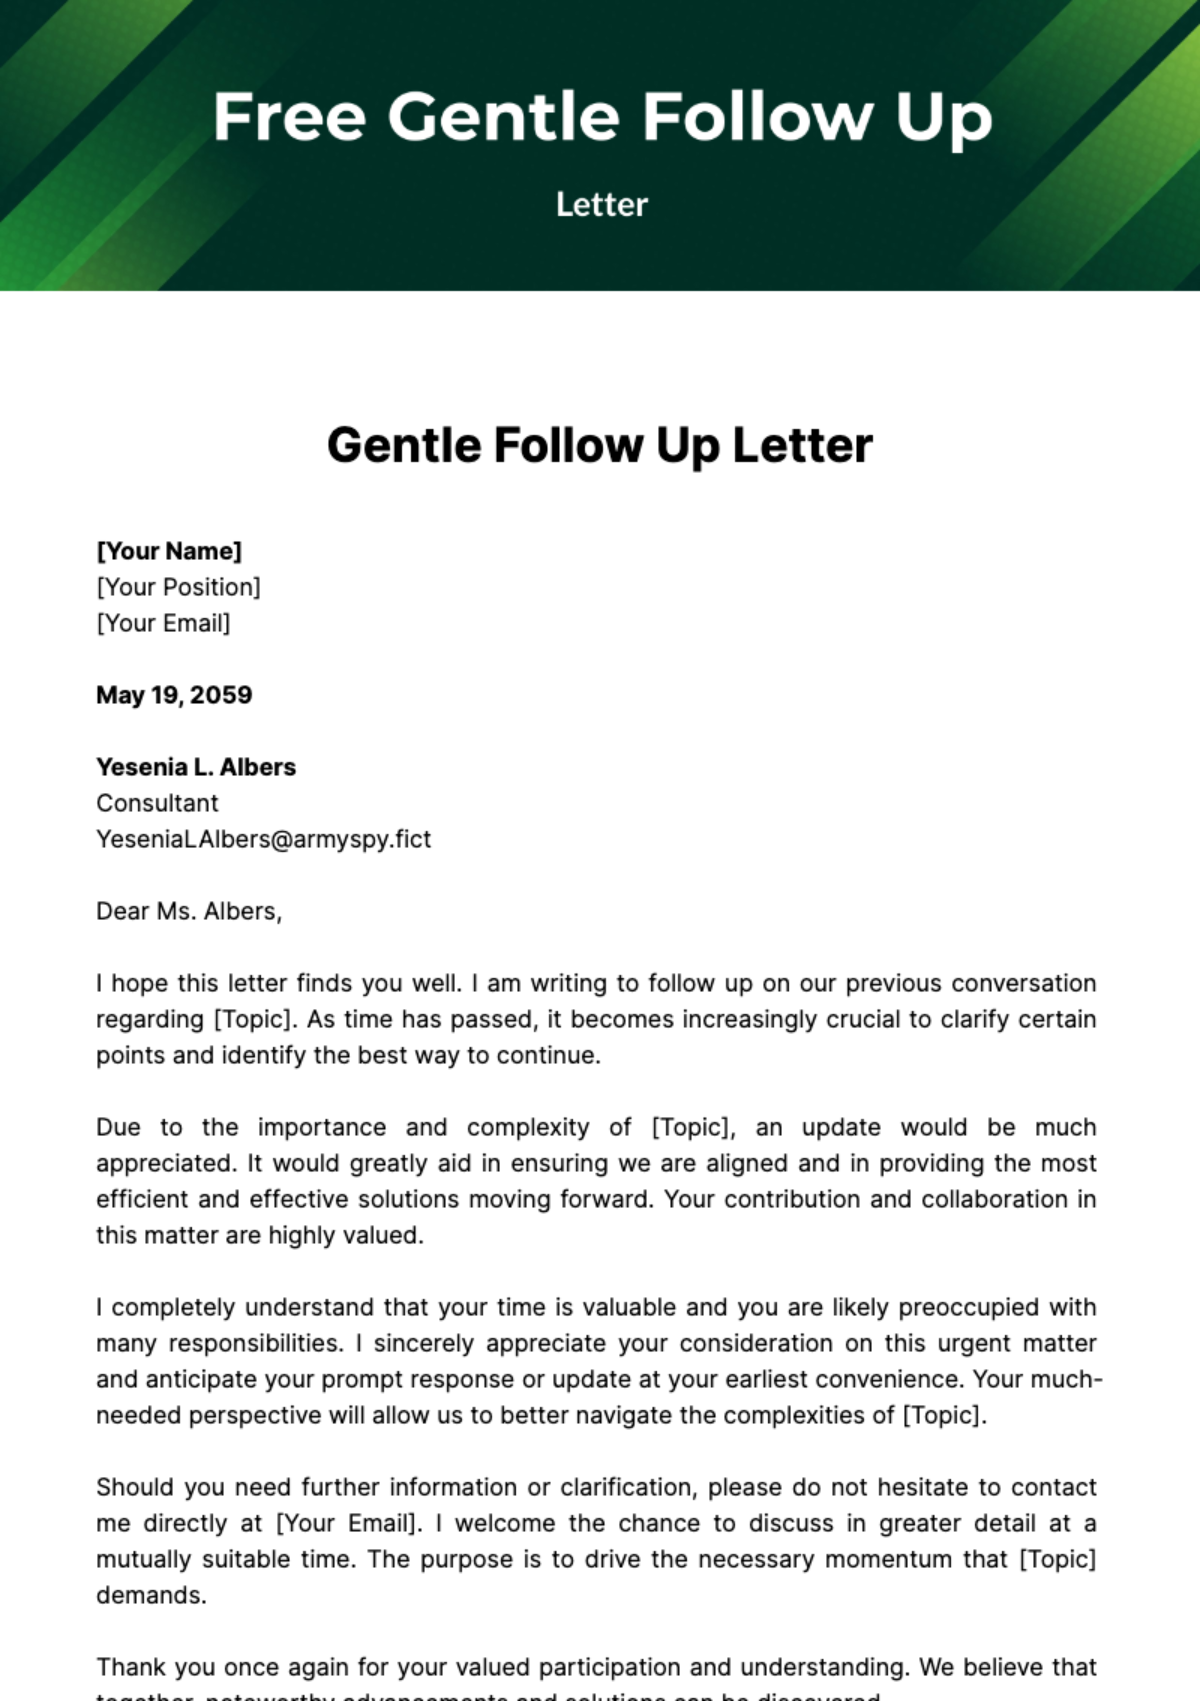 Free Gentle Follow Up Letter Template